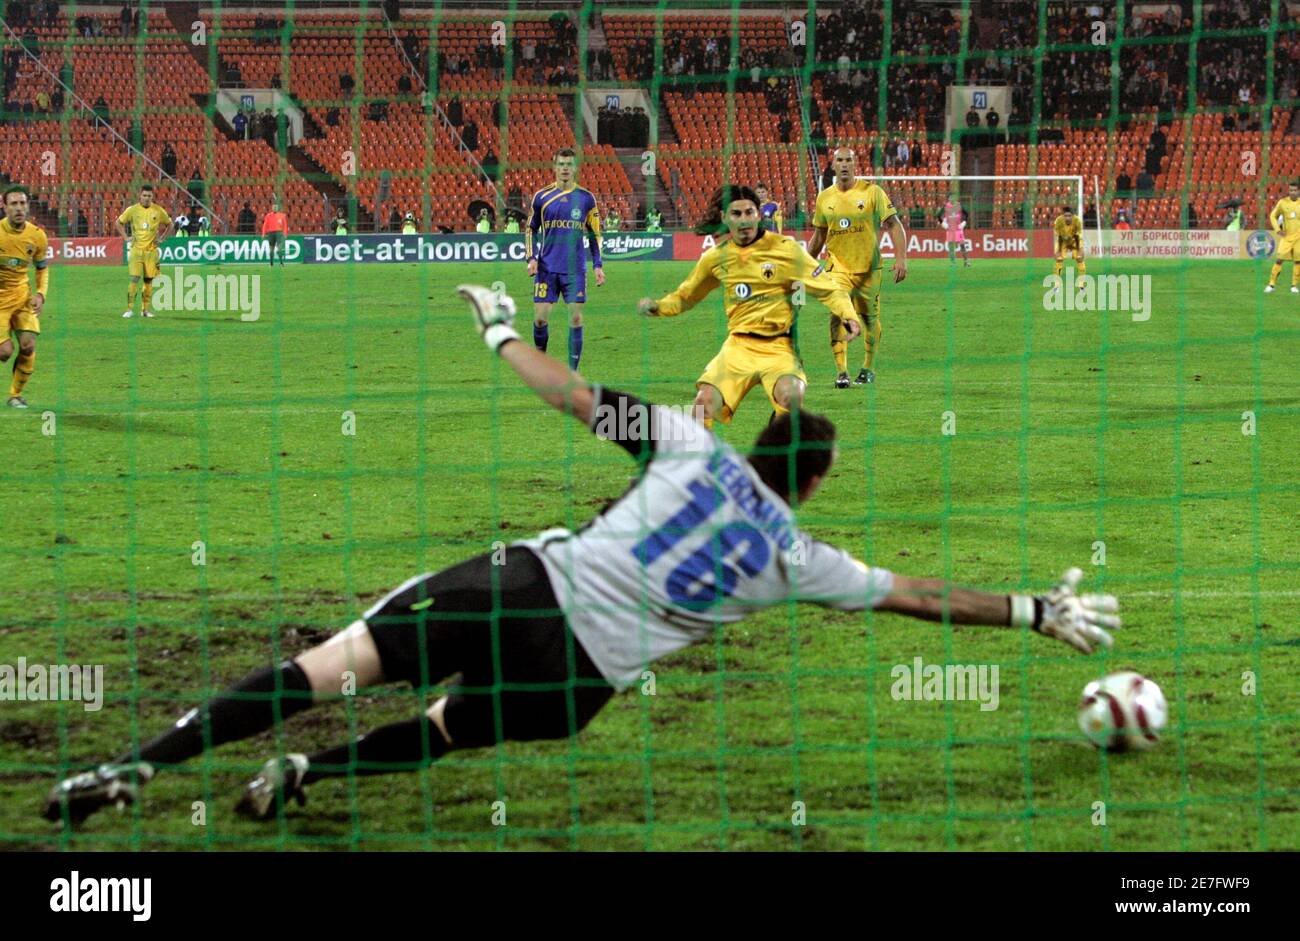 AEK Athens's Ismael Blanco (C) scores a penalty against BATE Borisov's  Sergei Veremko during their Europa League match at the Dinamo stadium in  Minsk October 22, 2009. REUTERS/Vasily Fedosenko (BELARUS SPORT SOCCER